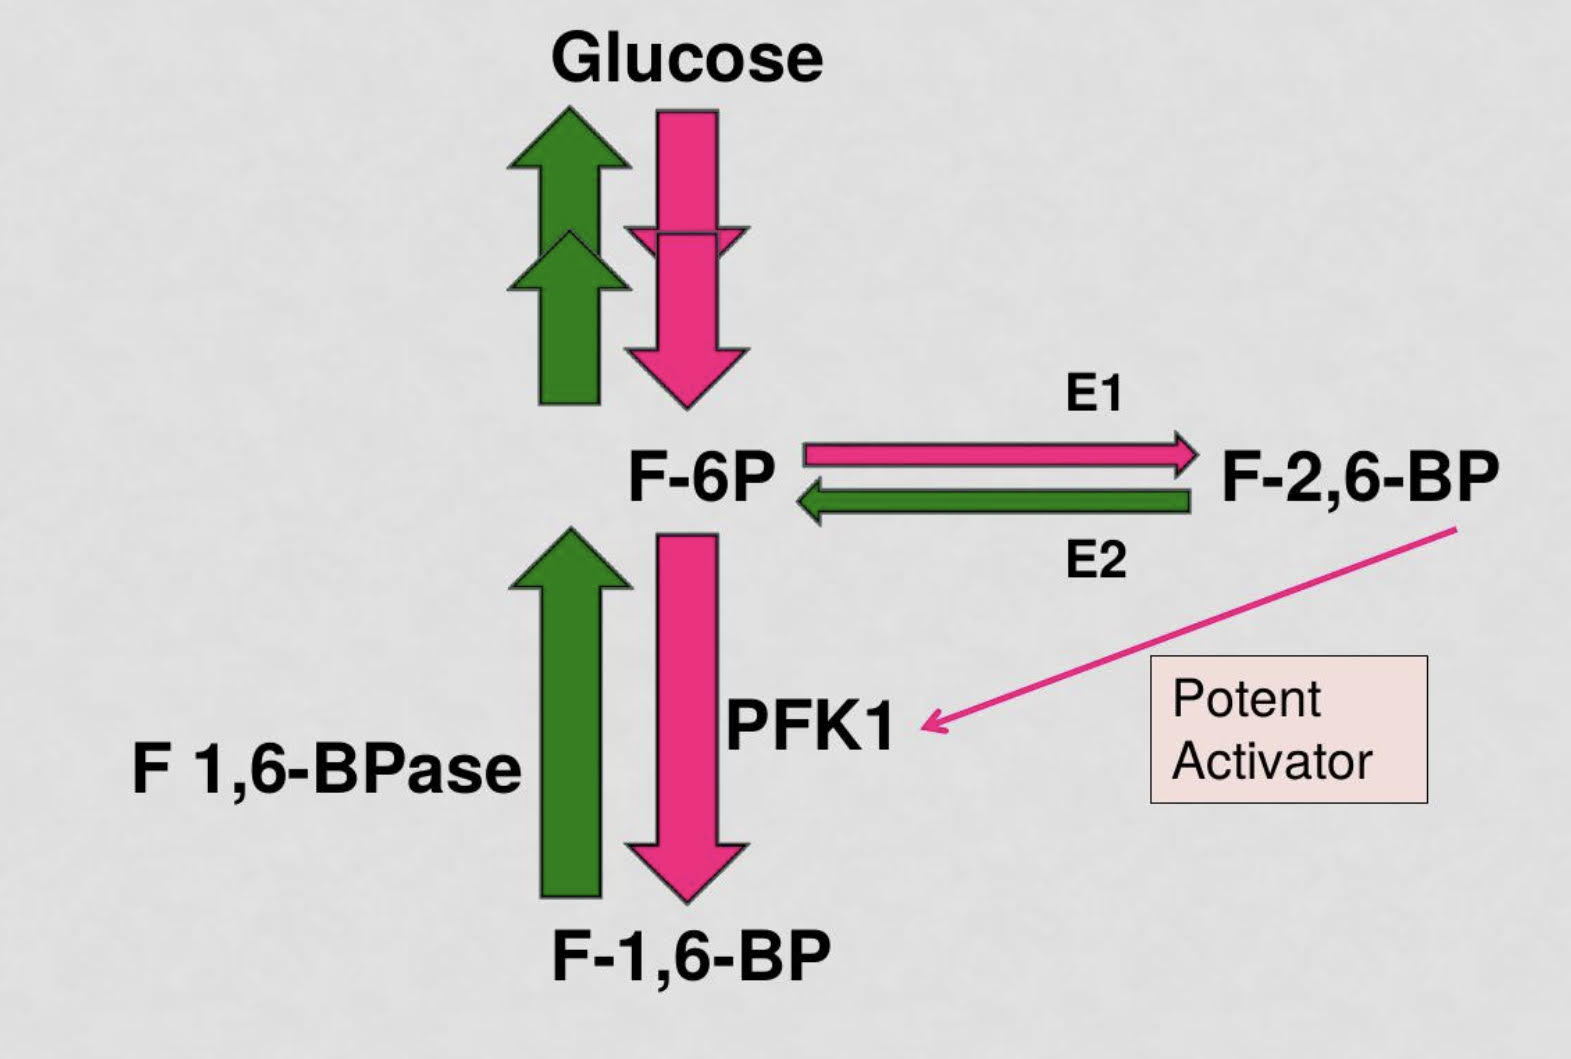 <p>when one pathway is highly active the other is inhibited; gluconeogenesis uses more ATP molecules than glycolysis produces so if both were to be activated at the same time, the net effect would be a depletion of ATP.  Both glycolysis and gluconeogenesis are regulated by ATP concentration which acts an an allosteric regulator</p><p>Certain enzymes of the pathways are allosterically affected by both AMP and ATP or just one or the other. Regardless the flux they cause affects the entire pathway</p>